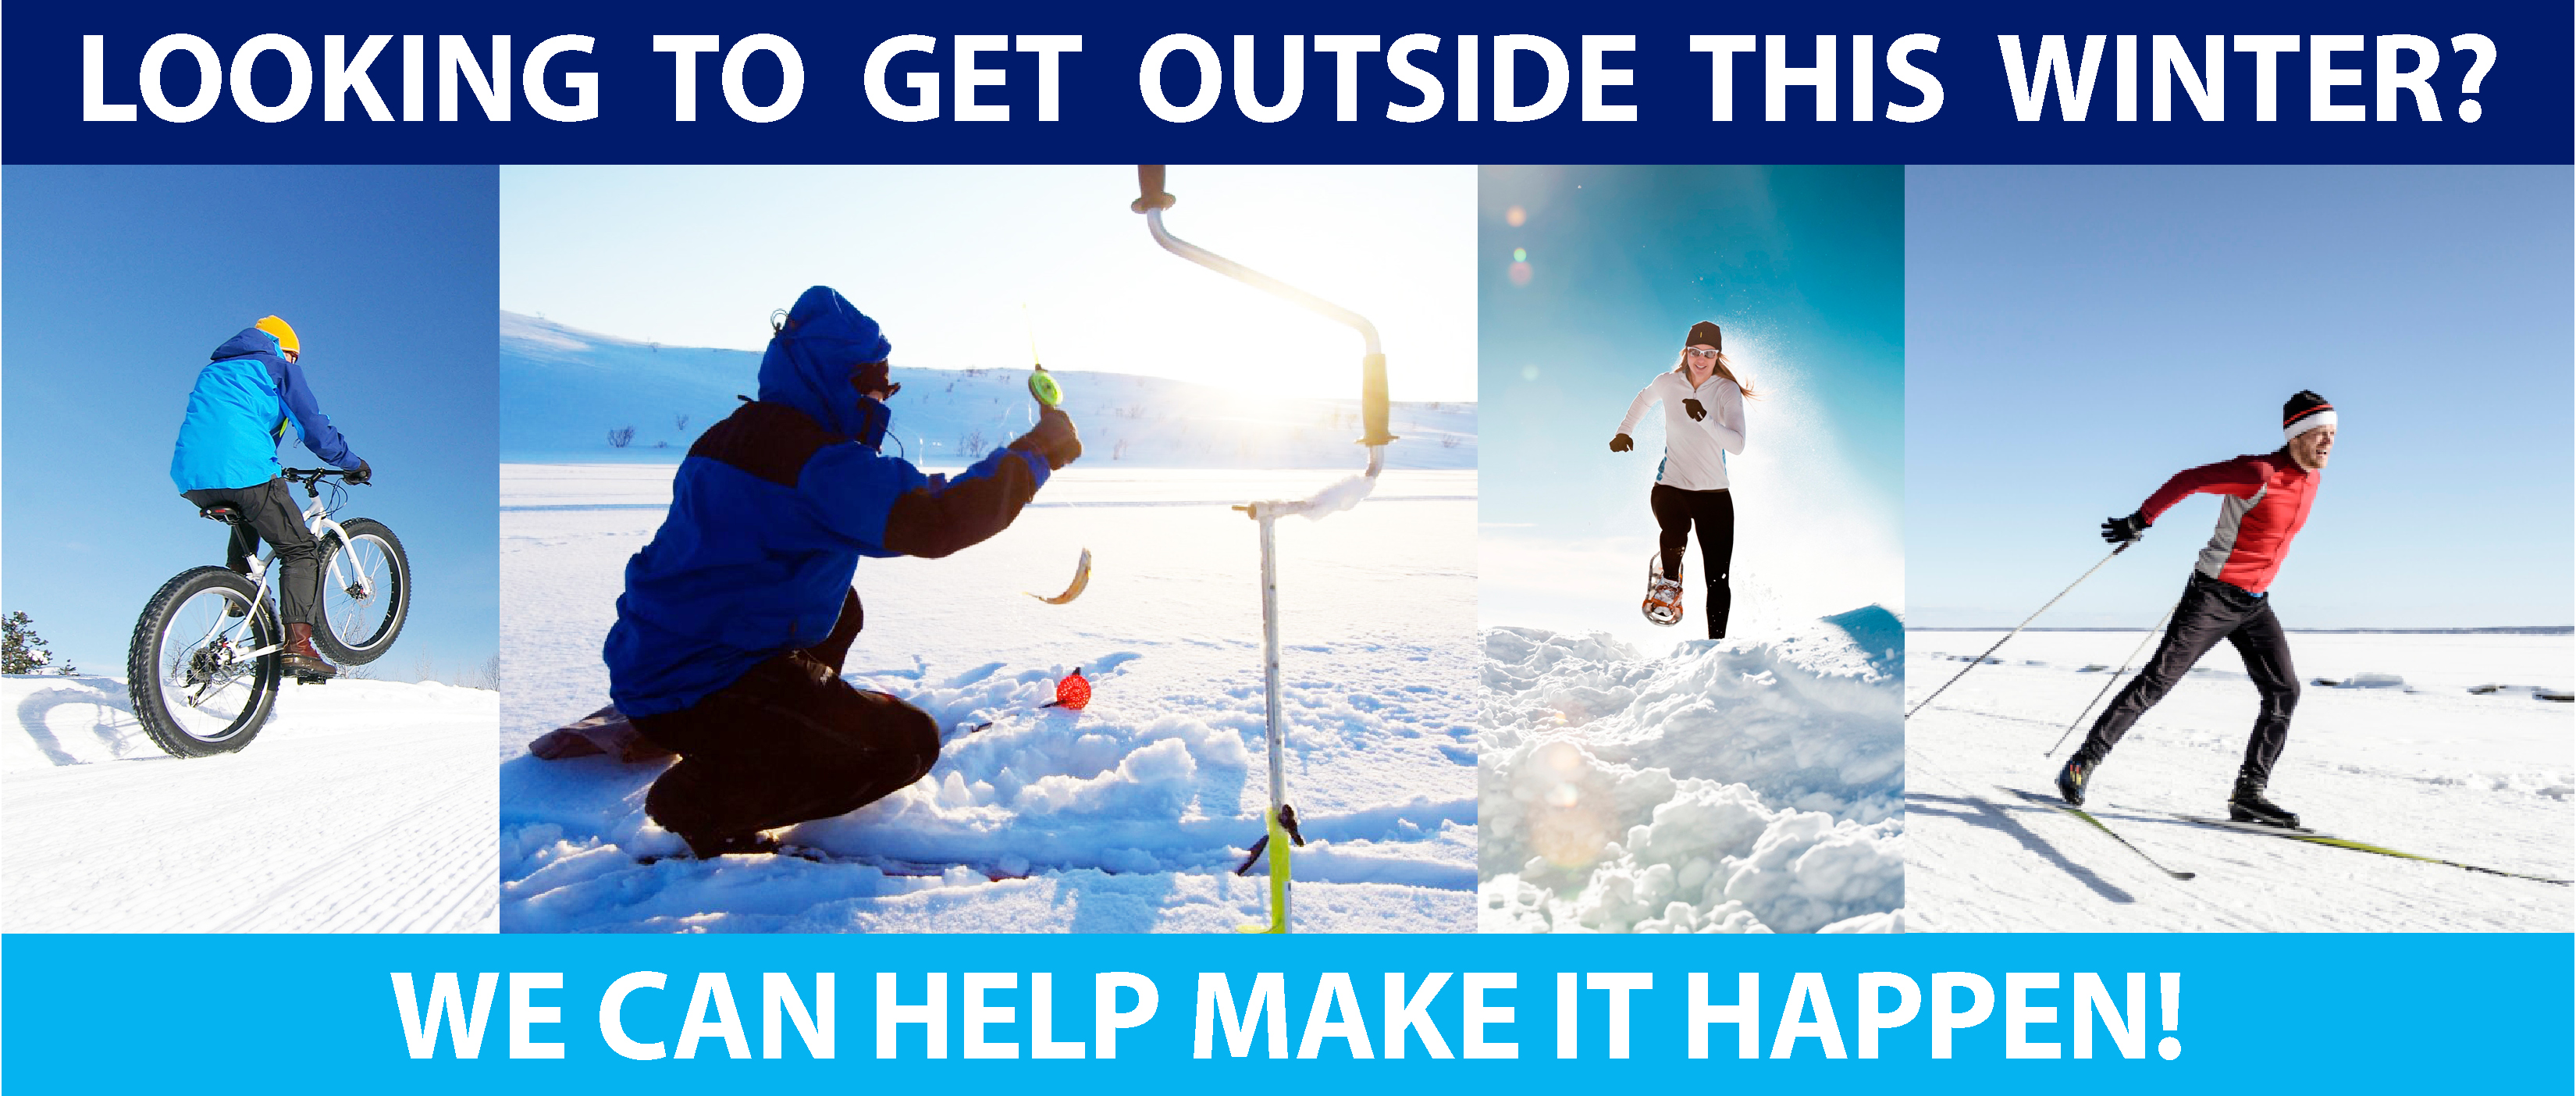 LOOKING TO GET OUTSIDE THIS WINTER? WE CAN HELP MAKE IT HAPPEN